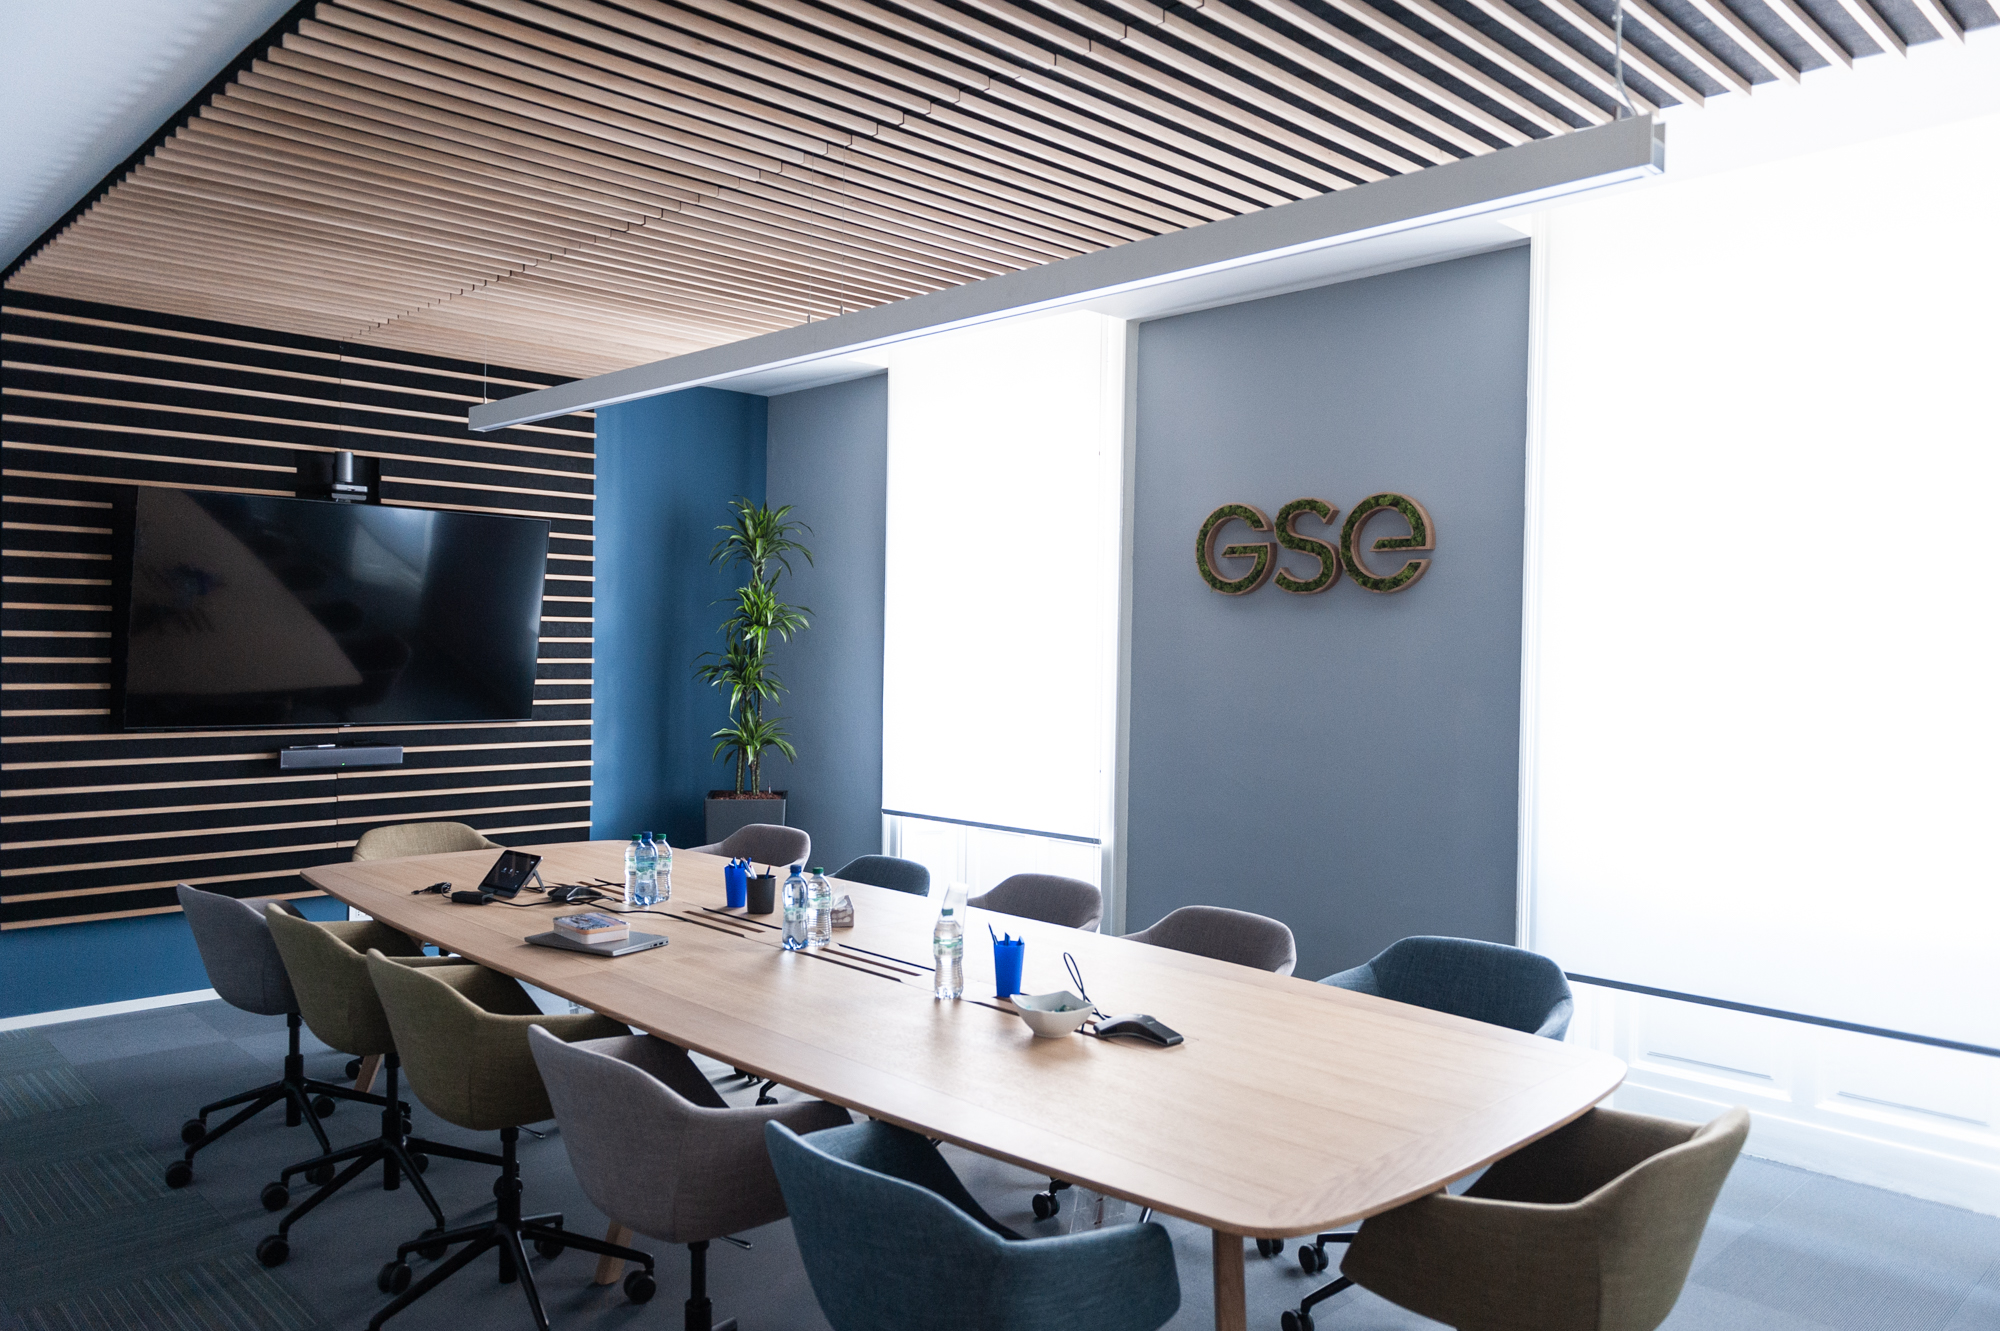 GSE ITALIA STRENGTHENS IN 2021 ITS GROWTH PATH